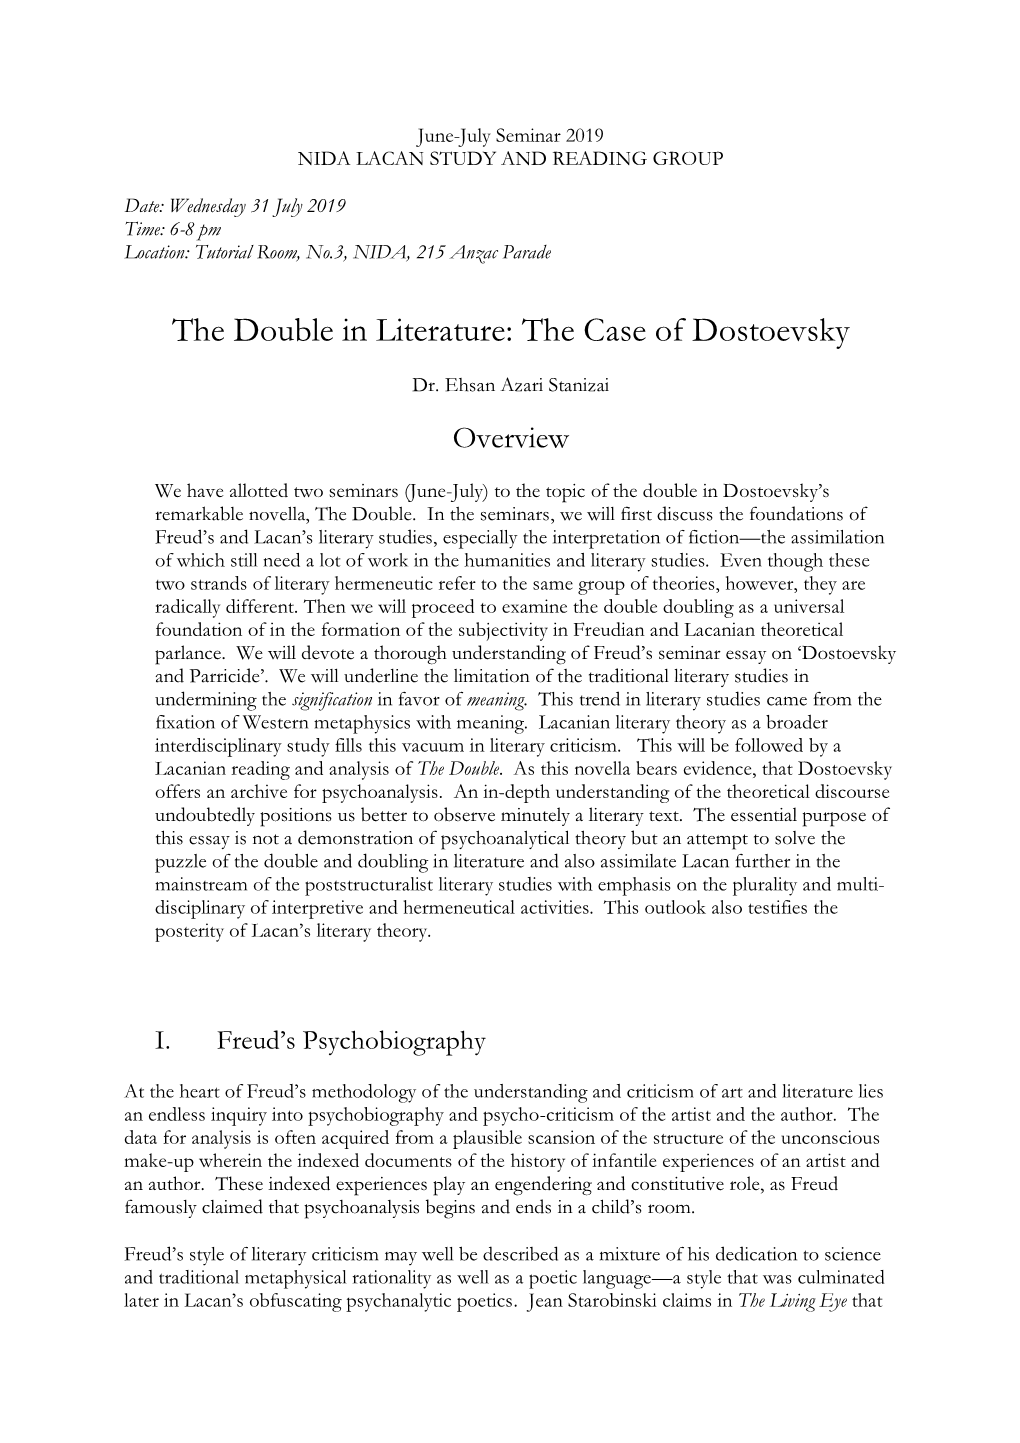 The Double in Literature: the Case of Dostoevsky